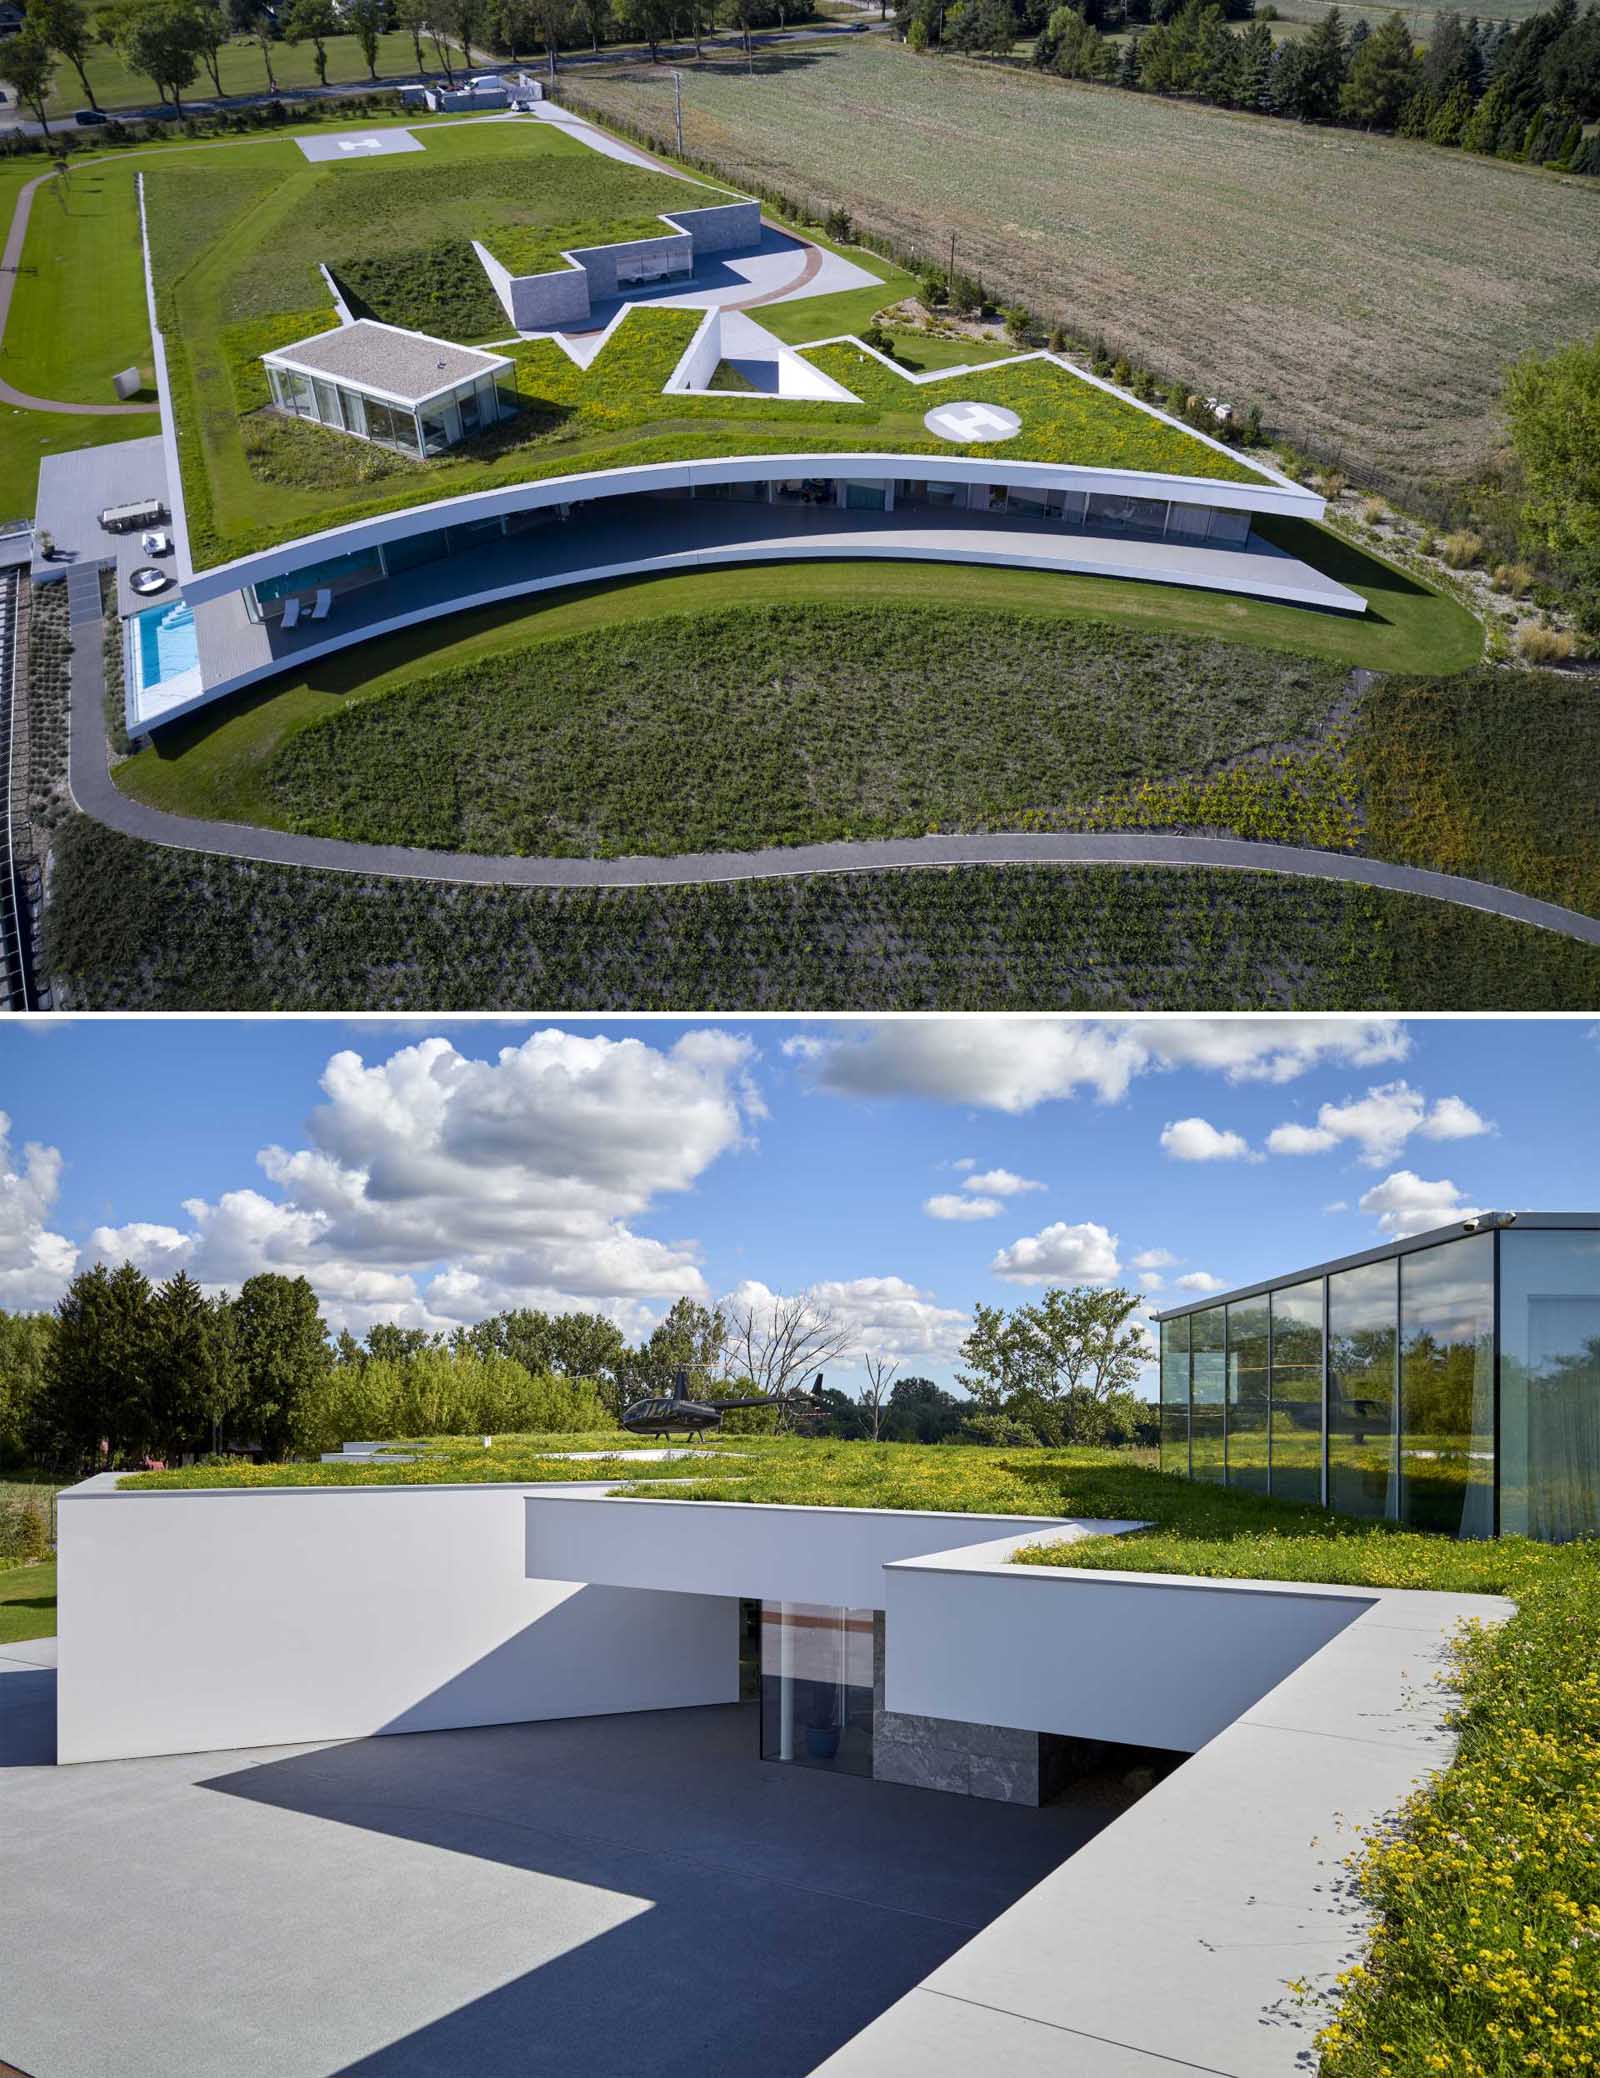 Not only does this modern house have a large green roof, it also has a curved design on one end, that overlooks the landscape and river below.